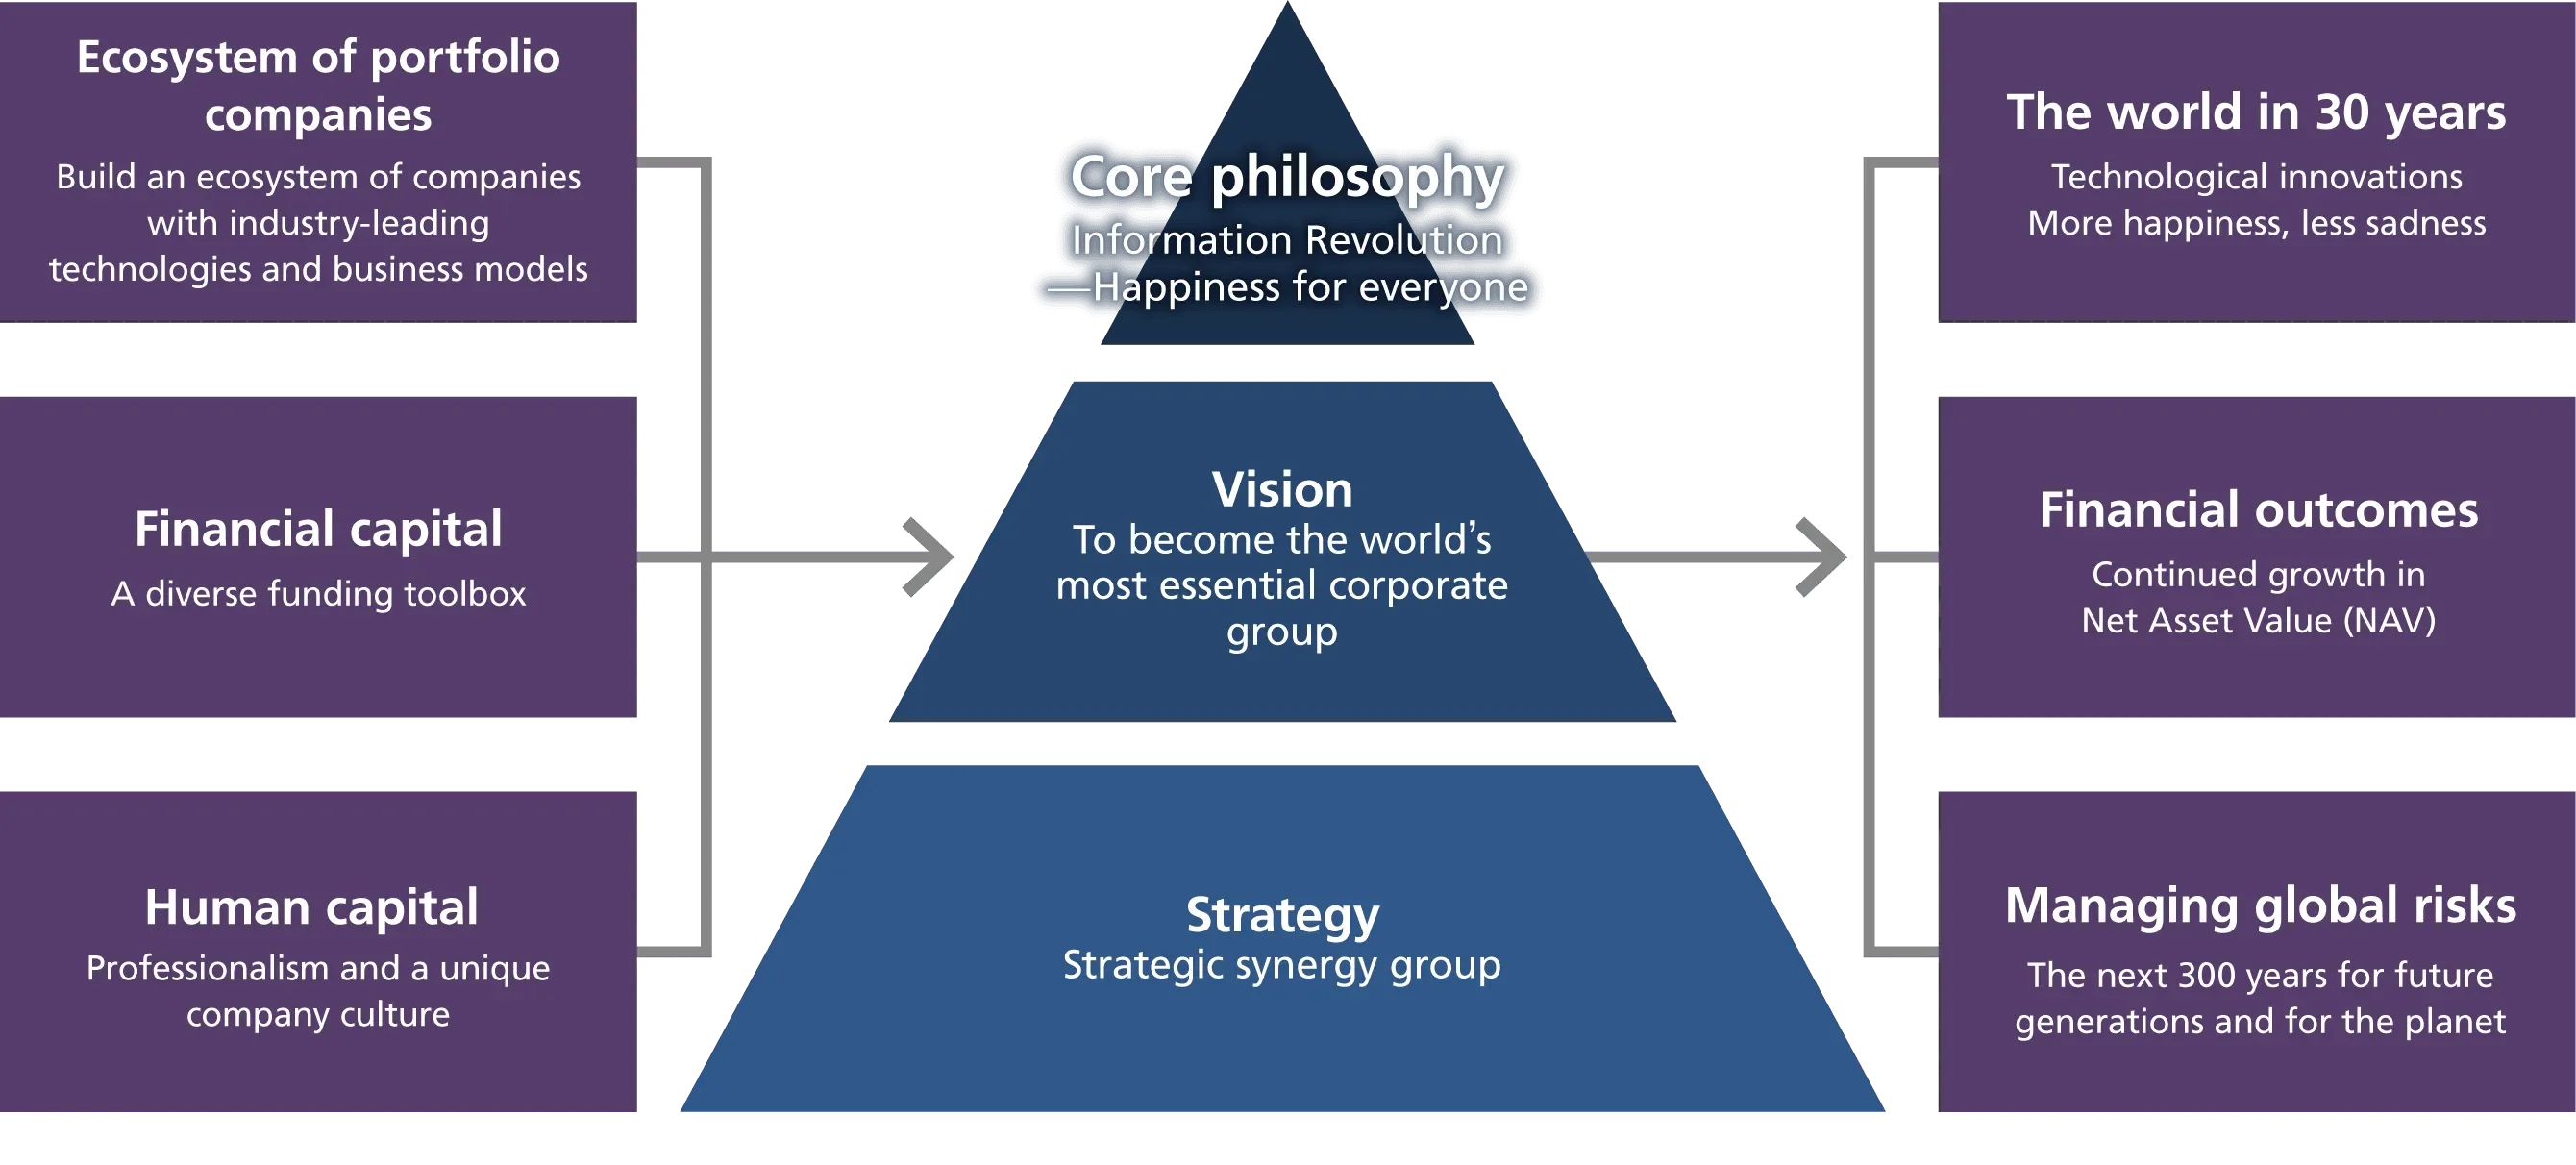 [Ecosystem of portfolio
            companies]Build an ecosystem of companies with industry-leading
            technologies and business models - [Financial capital]A diverse
            funding toolbox - [Human capital]Professionalism and a unique
            company culture. Next, from the bottom of pyramid diagram,   [Strategy]Strategic synergy group - [Vision]To become the world’s most essential corporate group - [Core philosophy]Information Revolution ̶Happiness for everyone.Next,[The world in 30 years]Technological innovations More happiness, less sadness - [Financial outcomes]Continued growth in Net Asset Value (NAV) - [Managing global risks]The next 300 years for future generations and for the planet